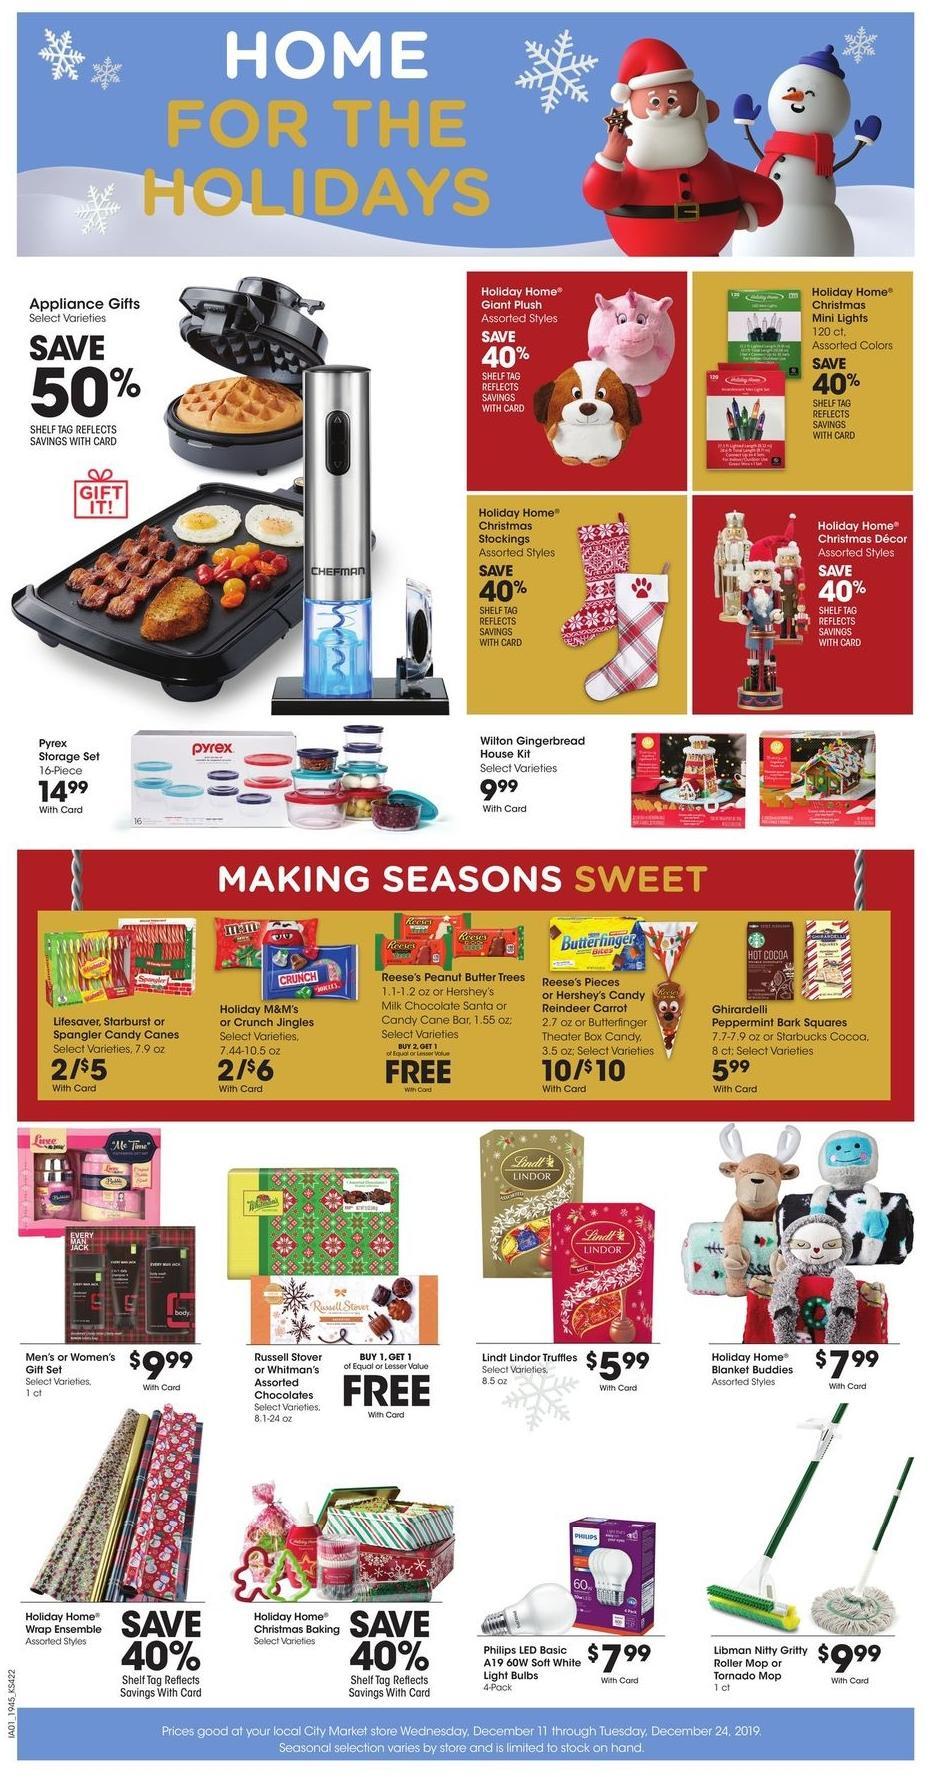 City Market Weekly Ad from December 11